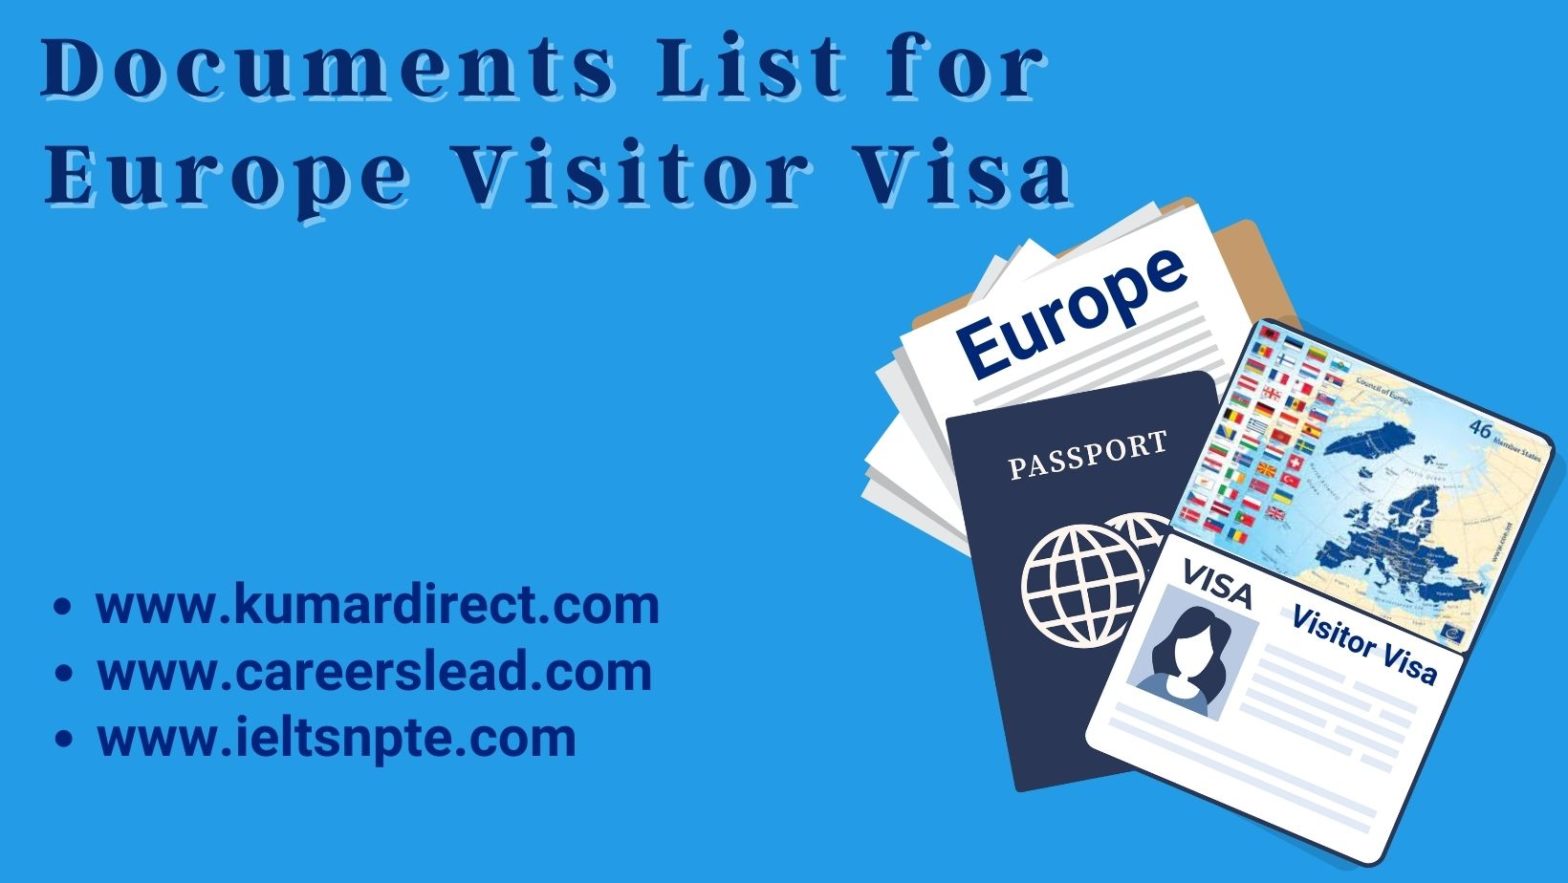 Documents List for Europe Visitor Visa